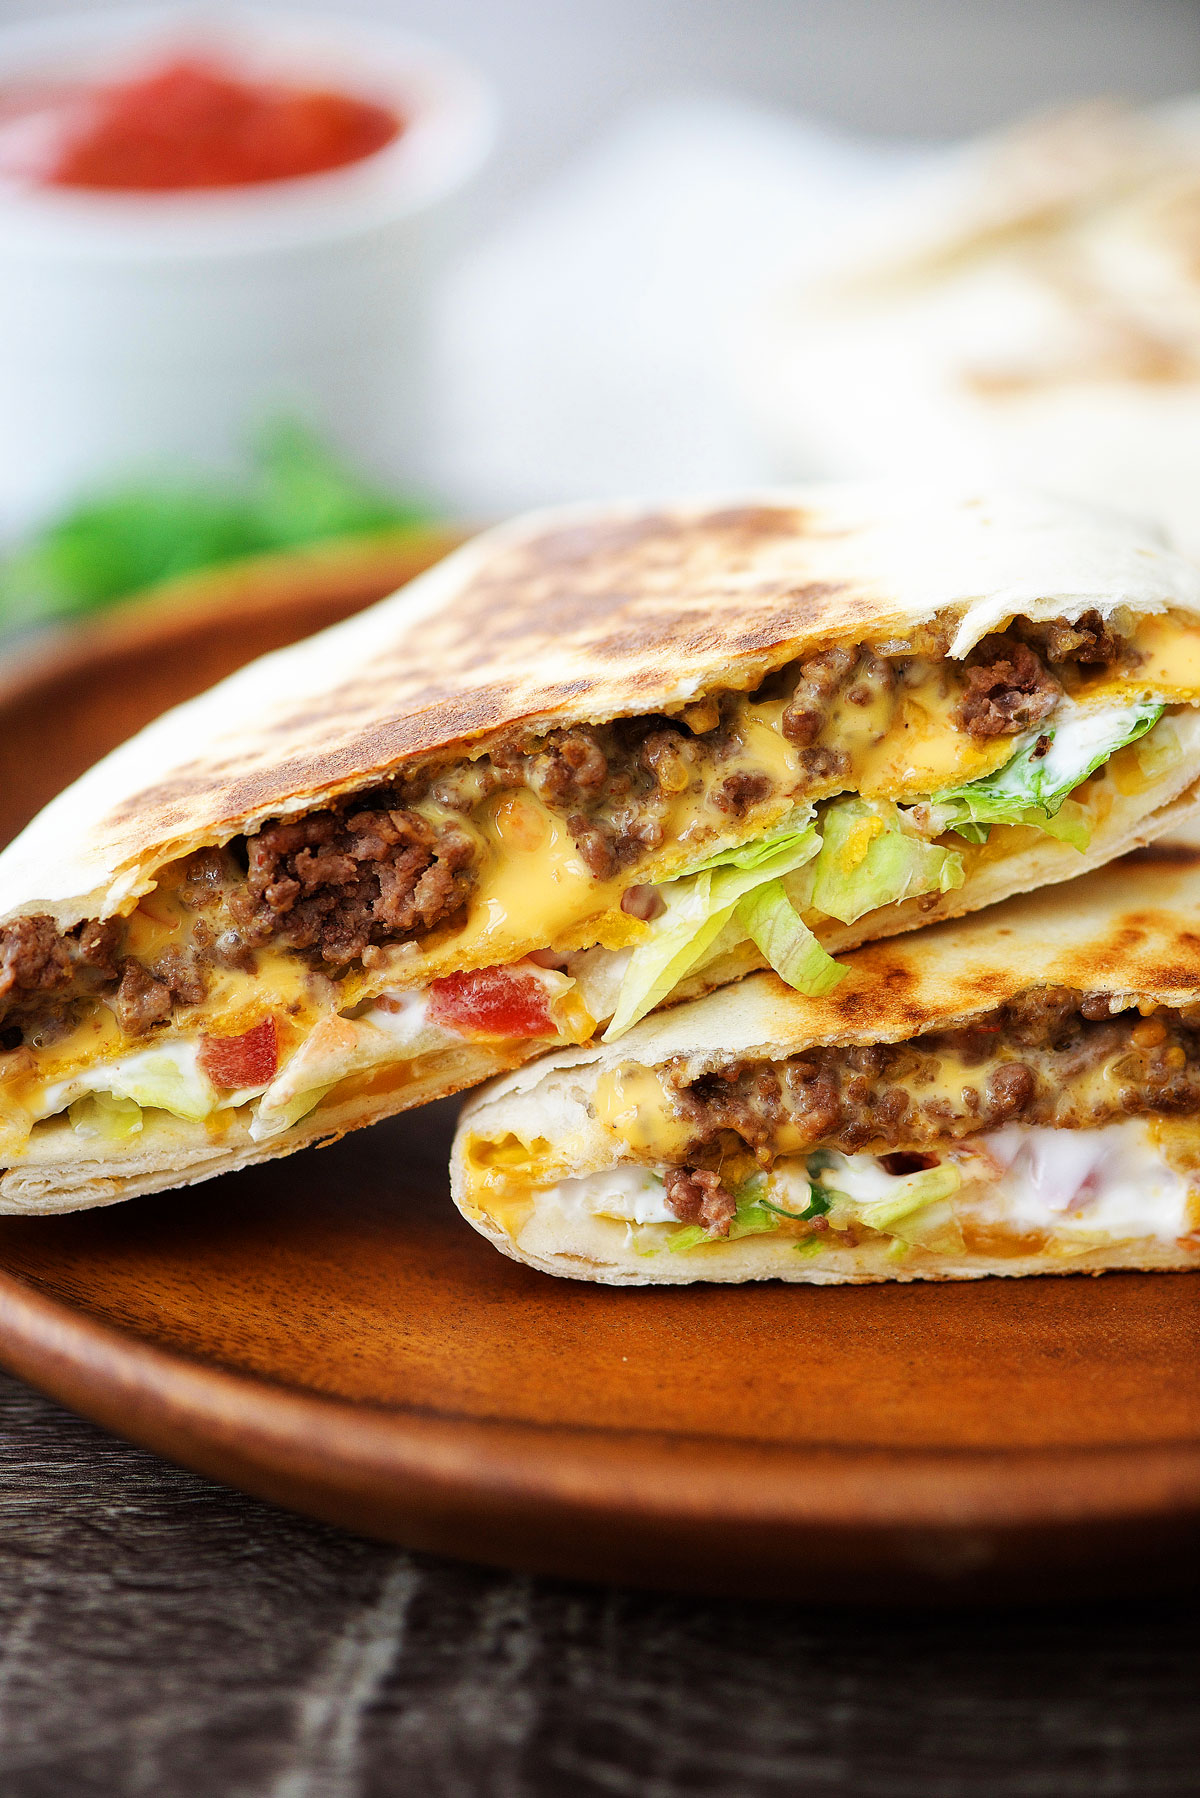 best of Review steak quesarito taco bell